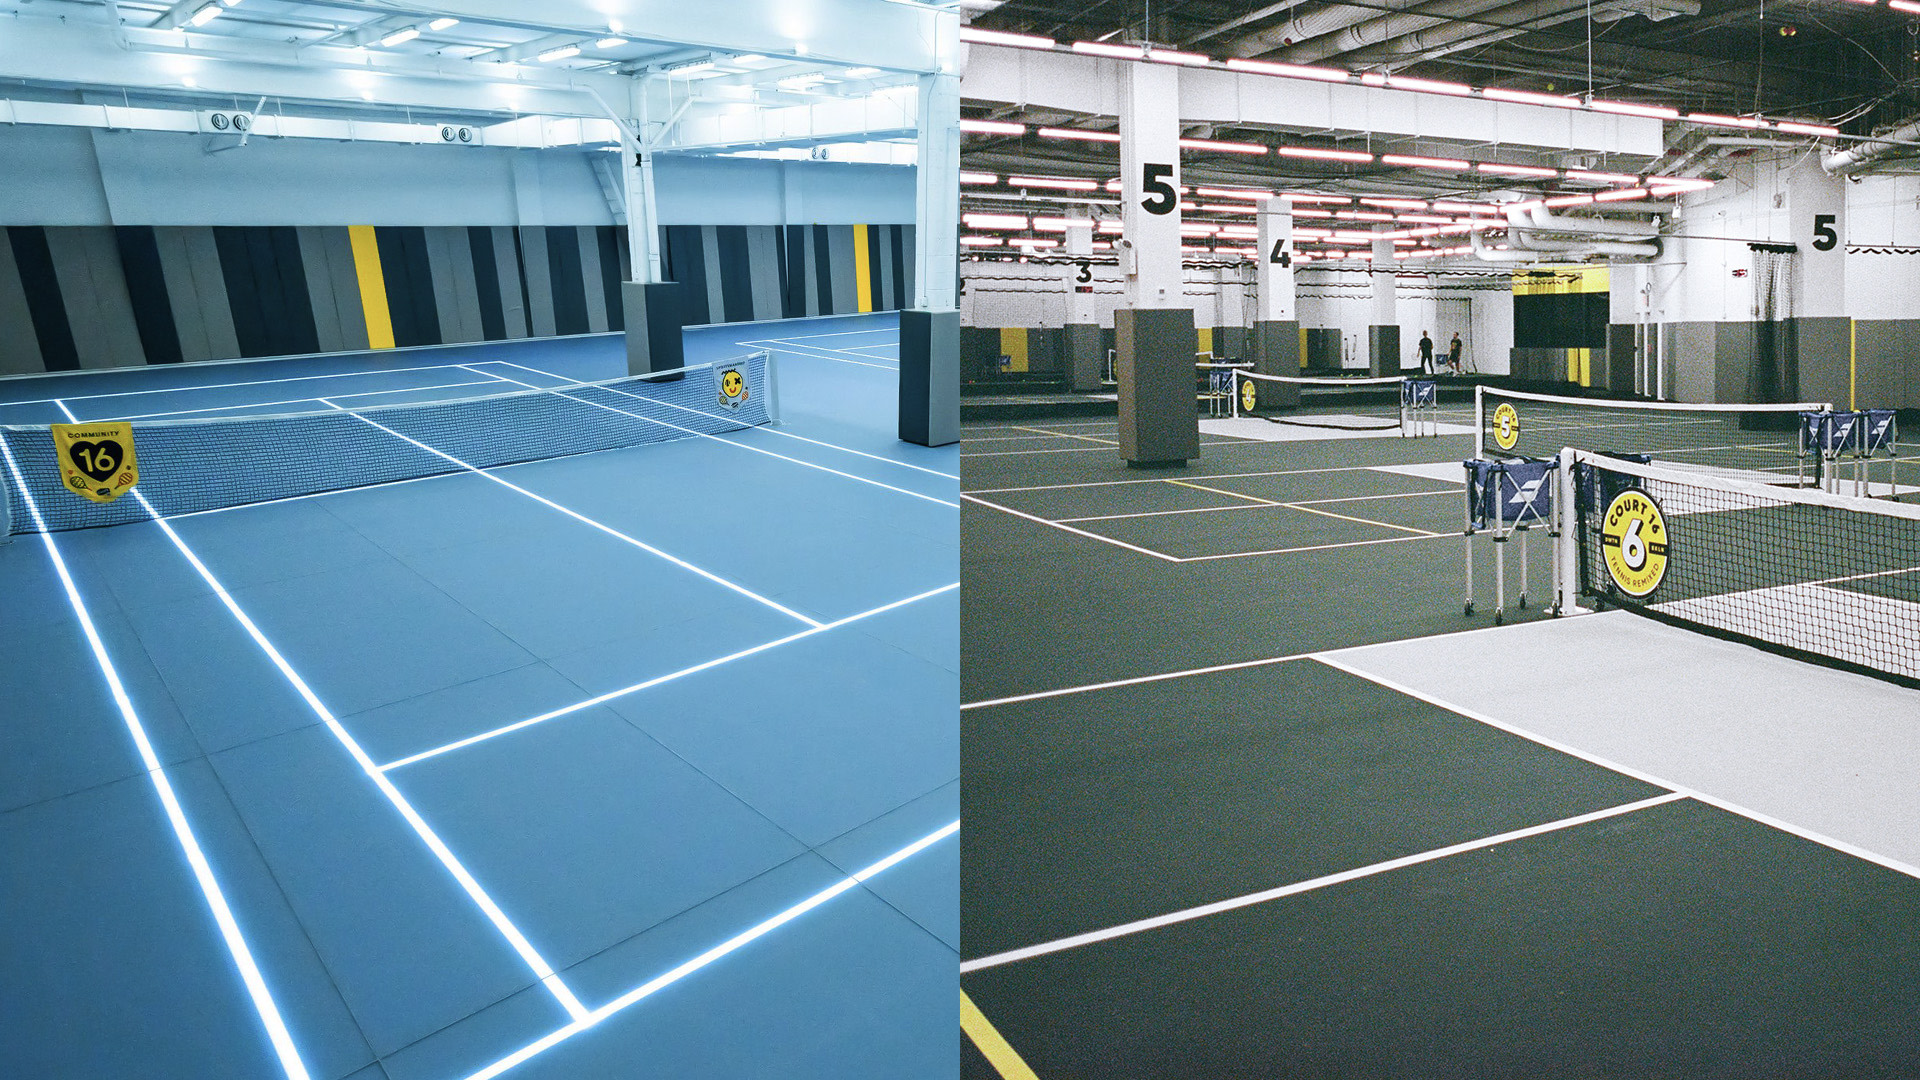 Court 16 Opening Third Private Indoor Racquets Facility - Club +